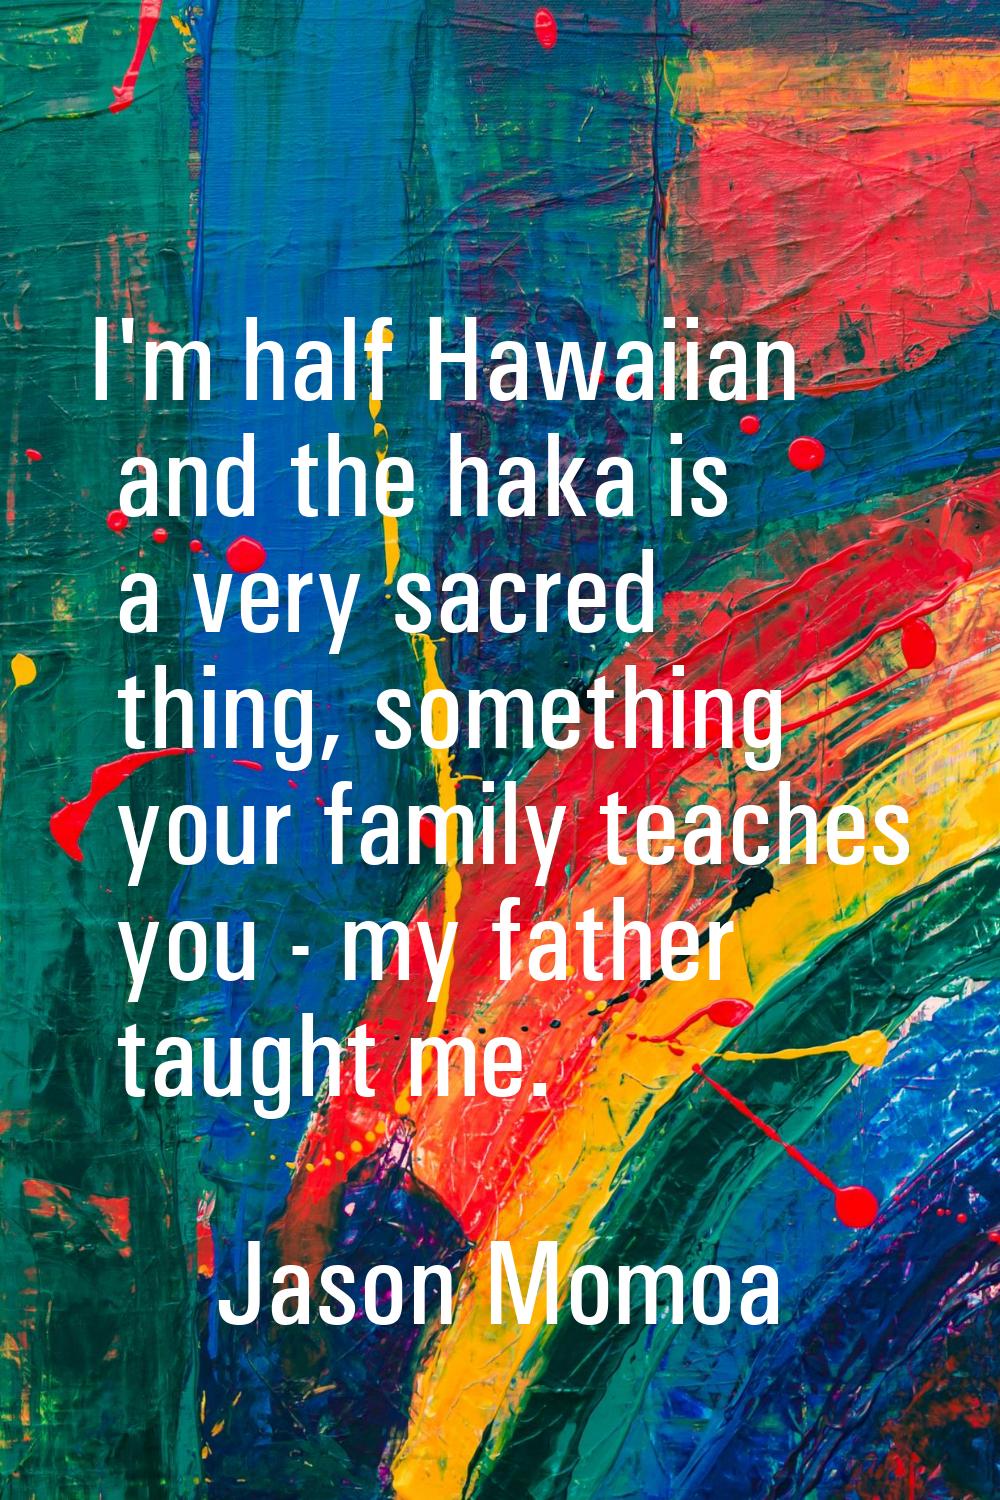 I'm half Hawaiian and the haka is a very sacred thing, something your family teaches you - my fathe